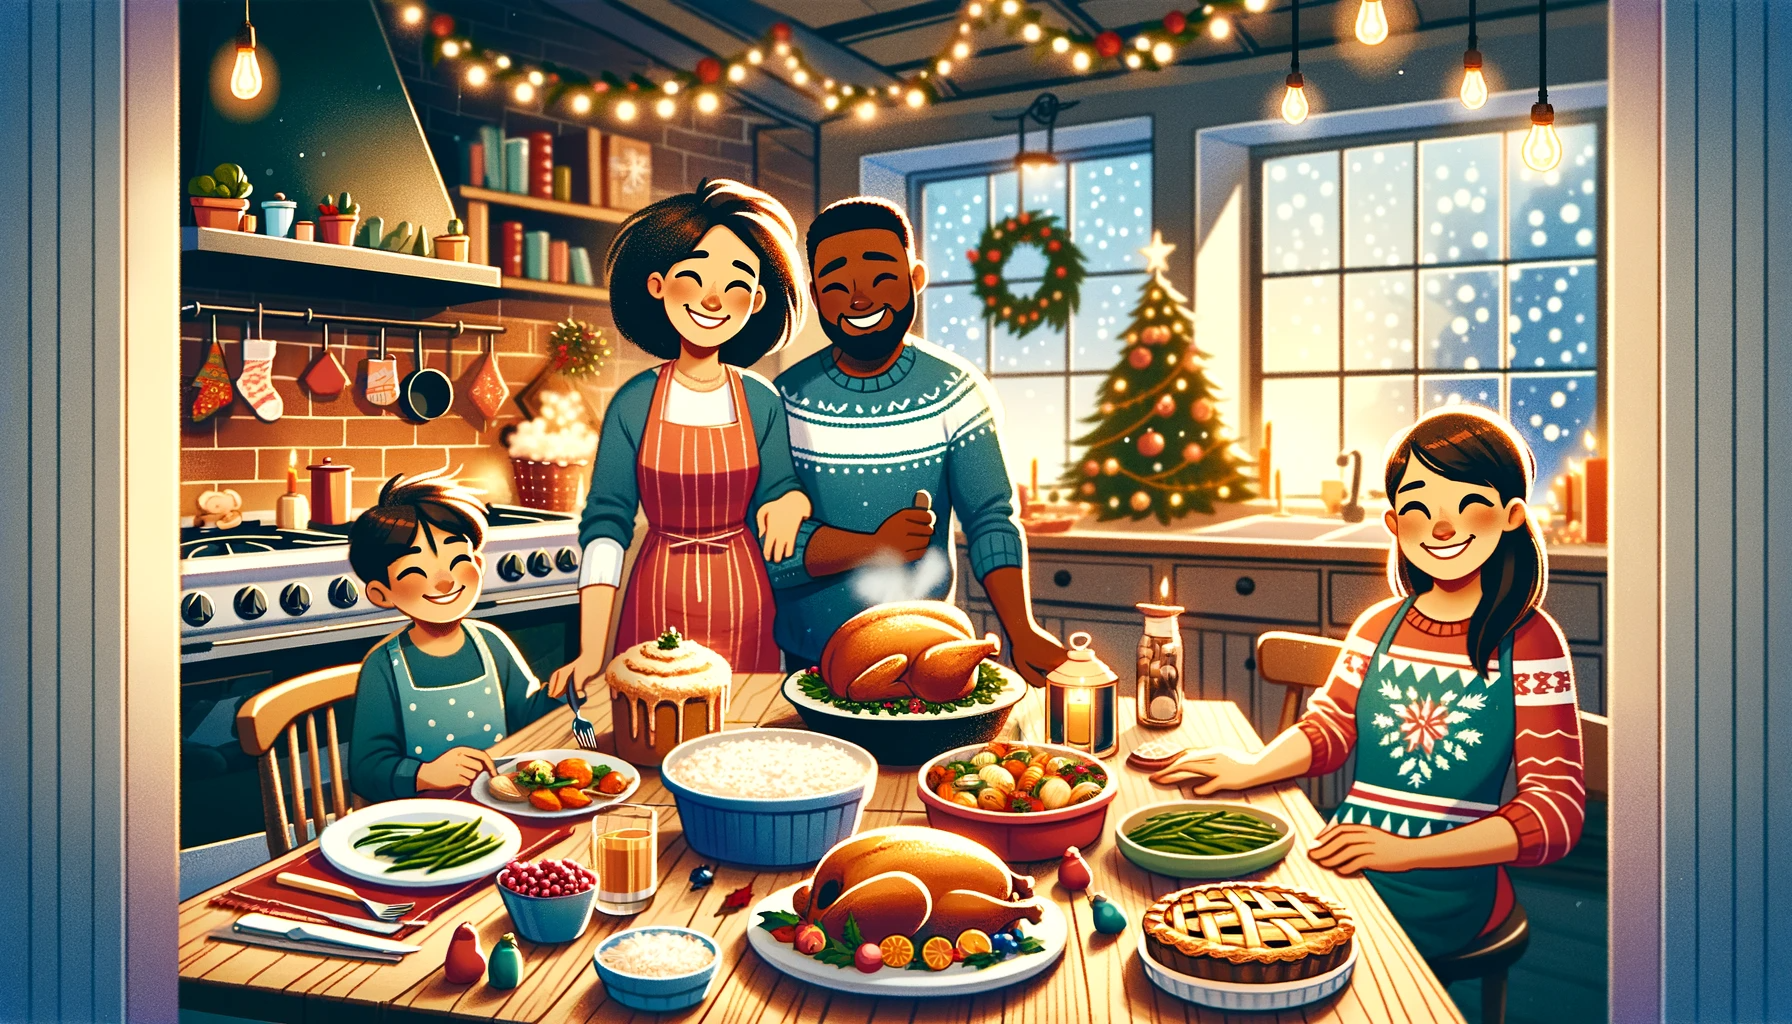  festive cartoon-style image depicting a cosy kitchen with a family preparing a Christmas meal. The table features a turkey, pie and various vegetables 